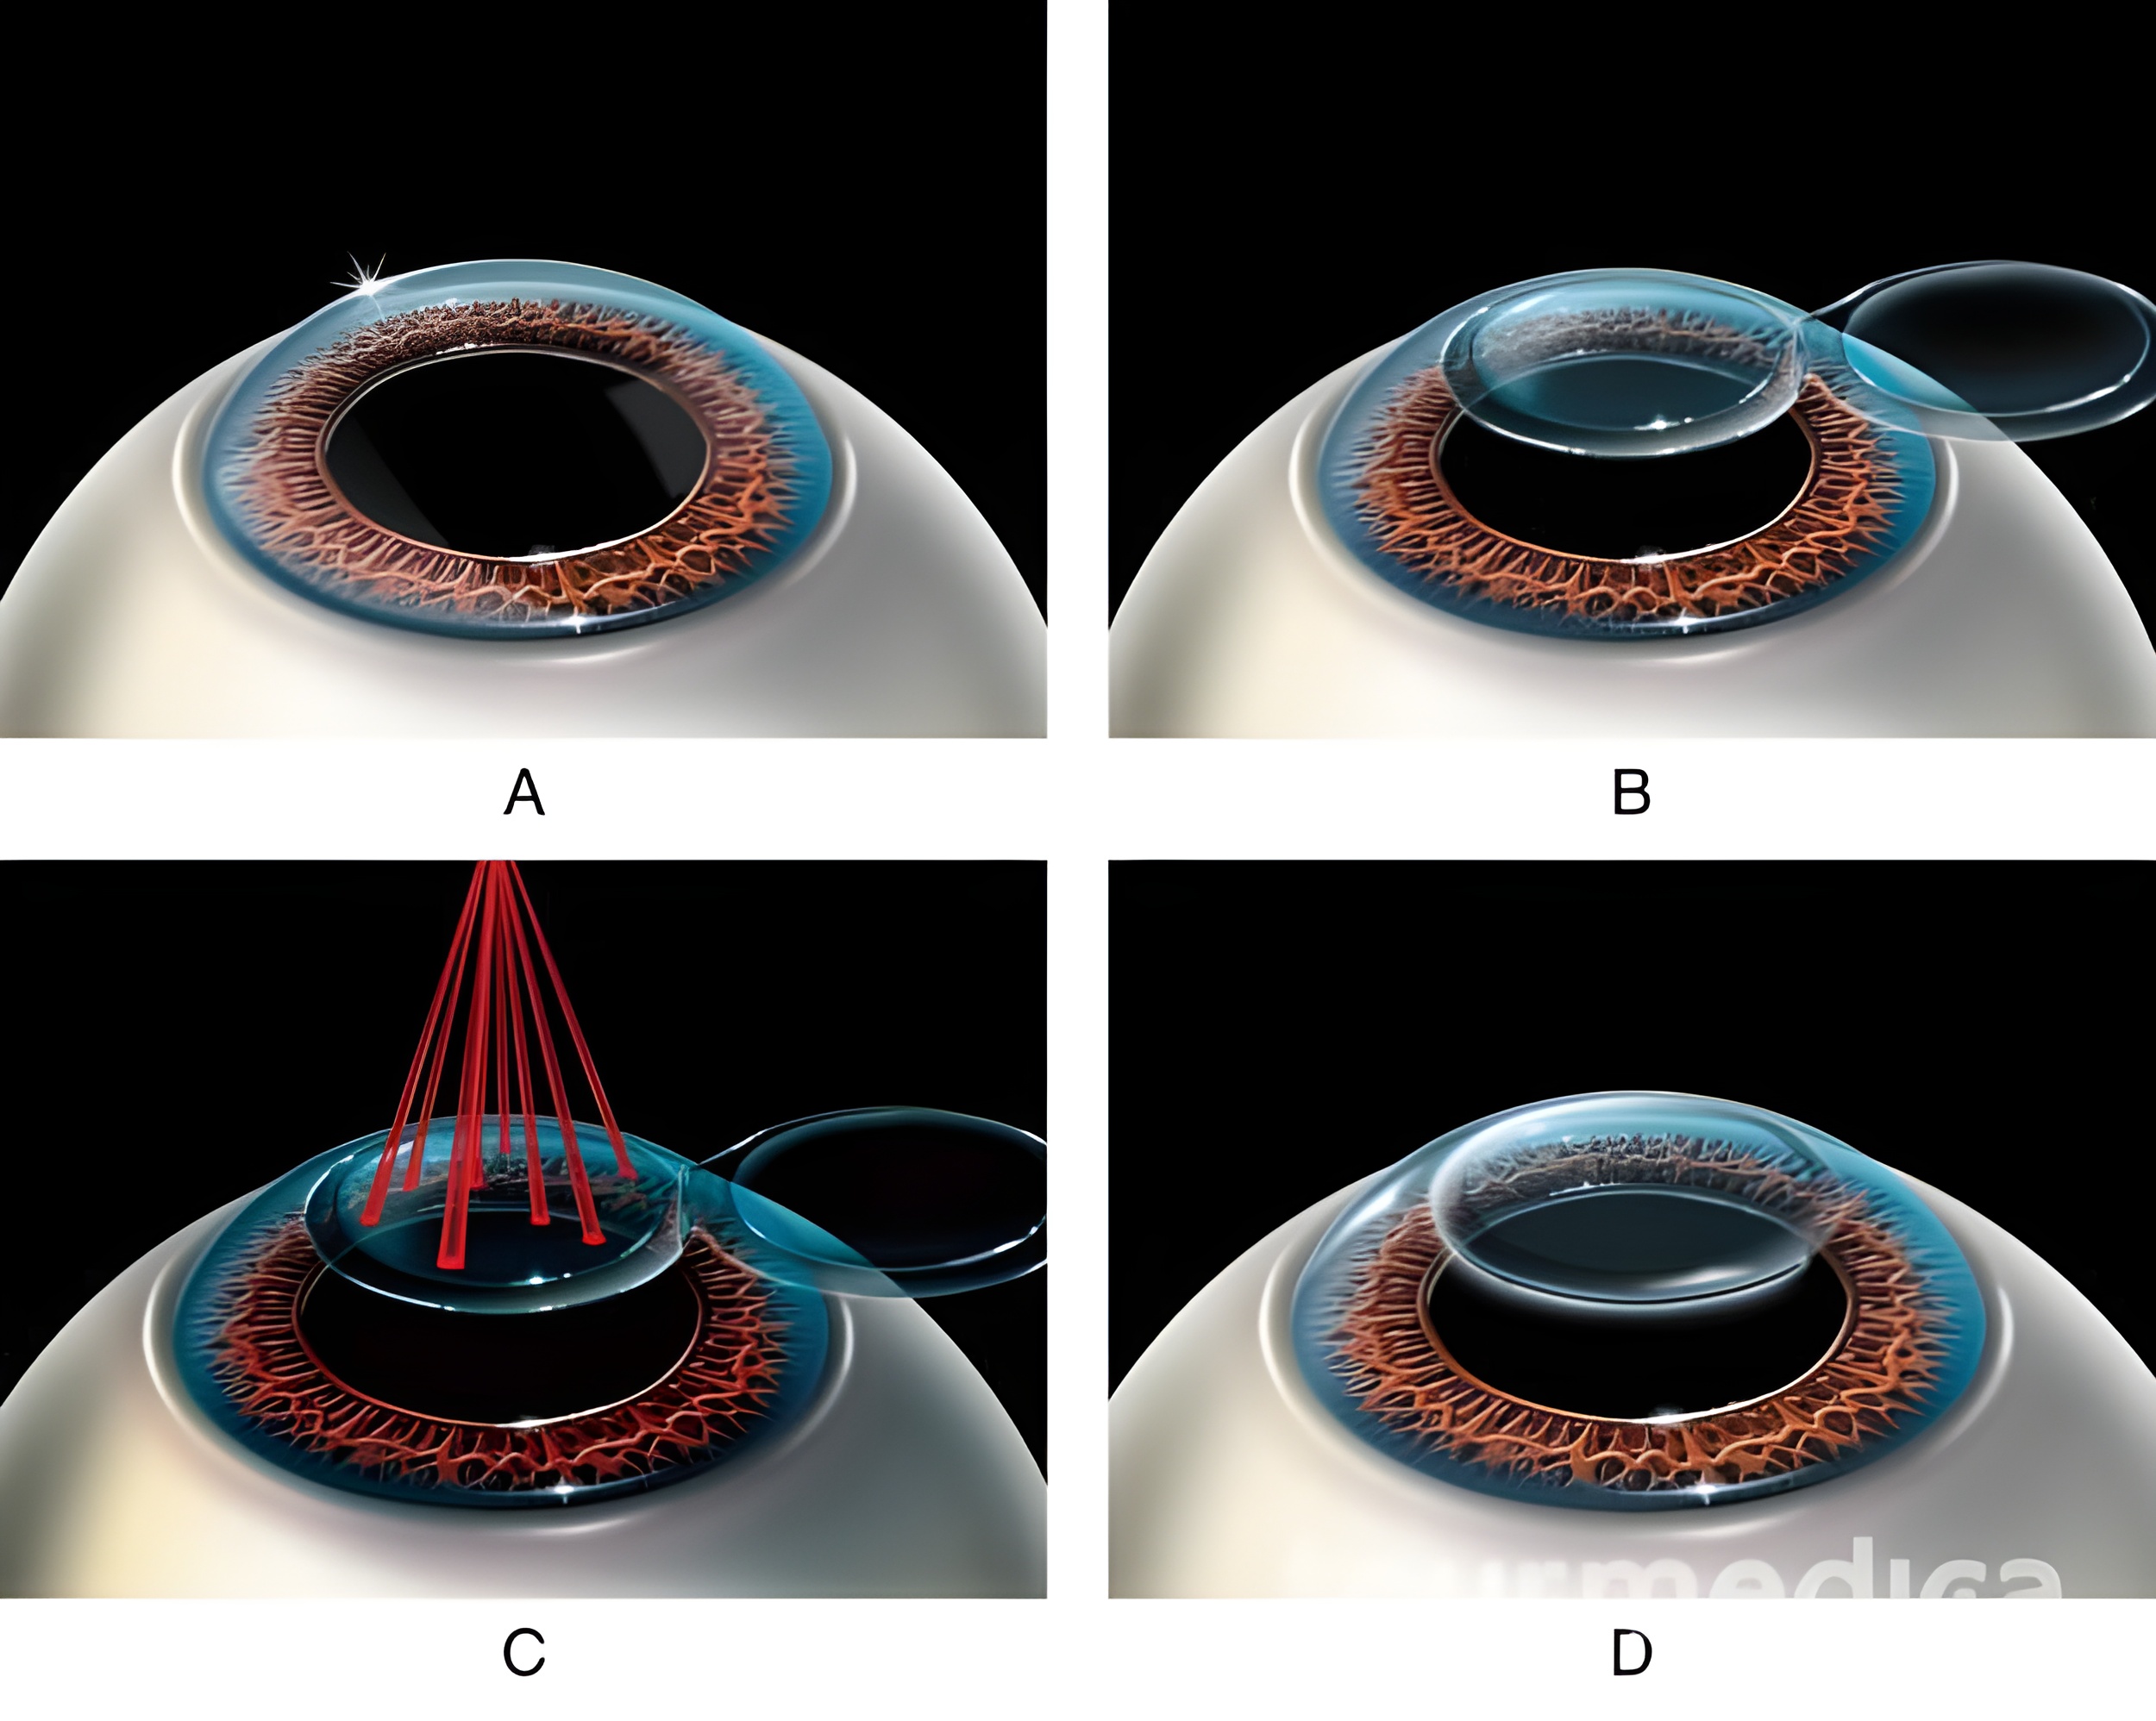 Schematic representation of lasik surgery on the eye